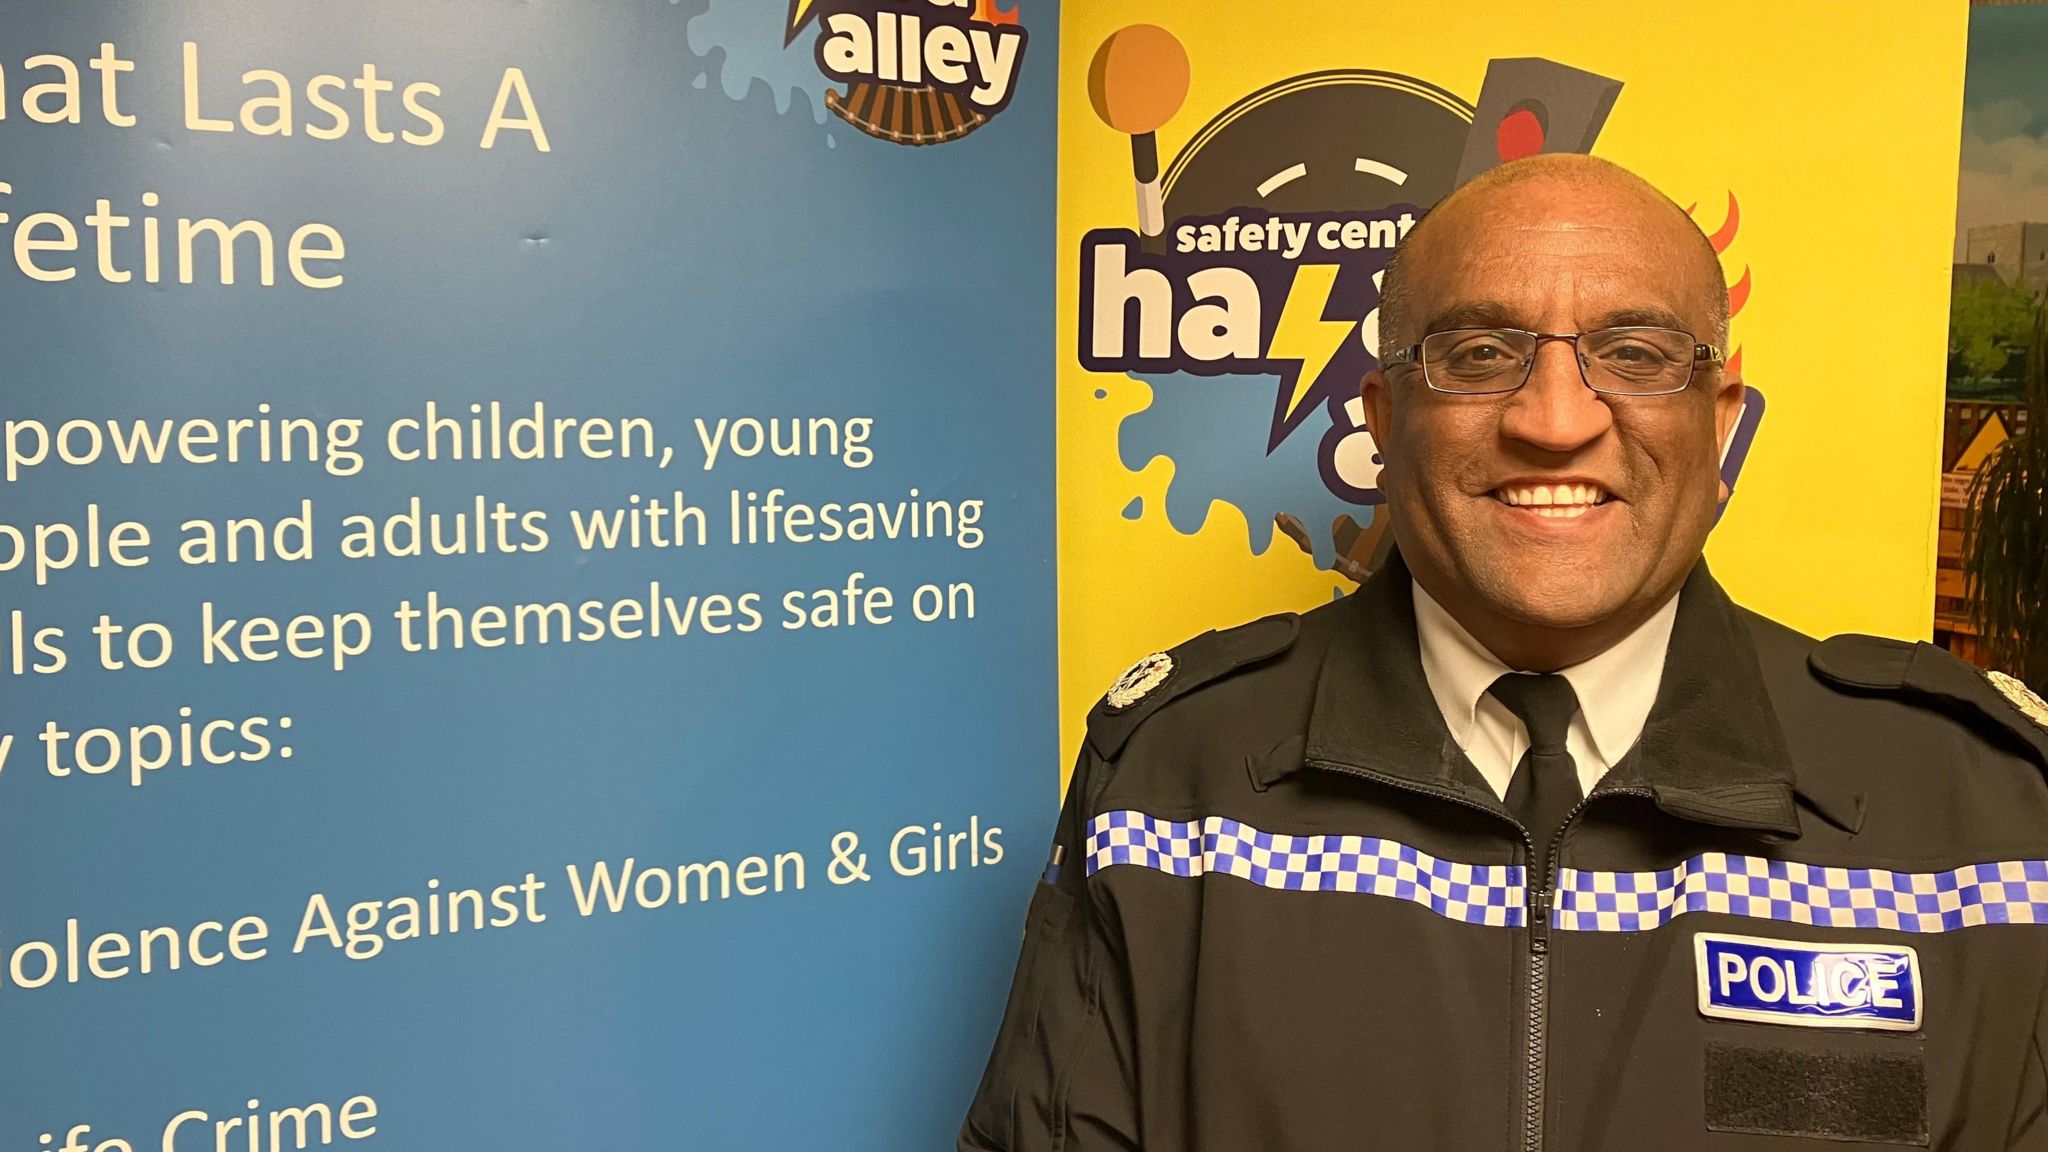 Assistant Chief Constable Dennis Murray from Thames Valley Police in a Police Uniform